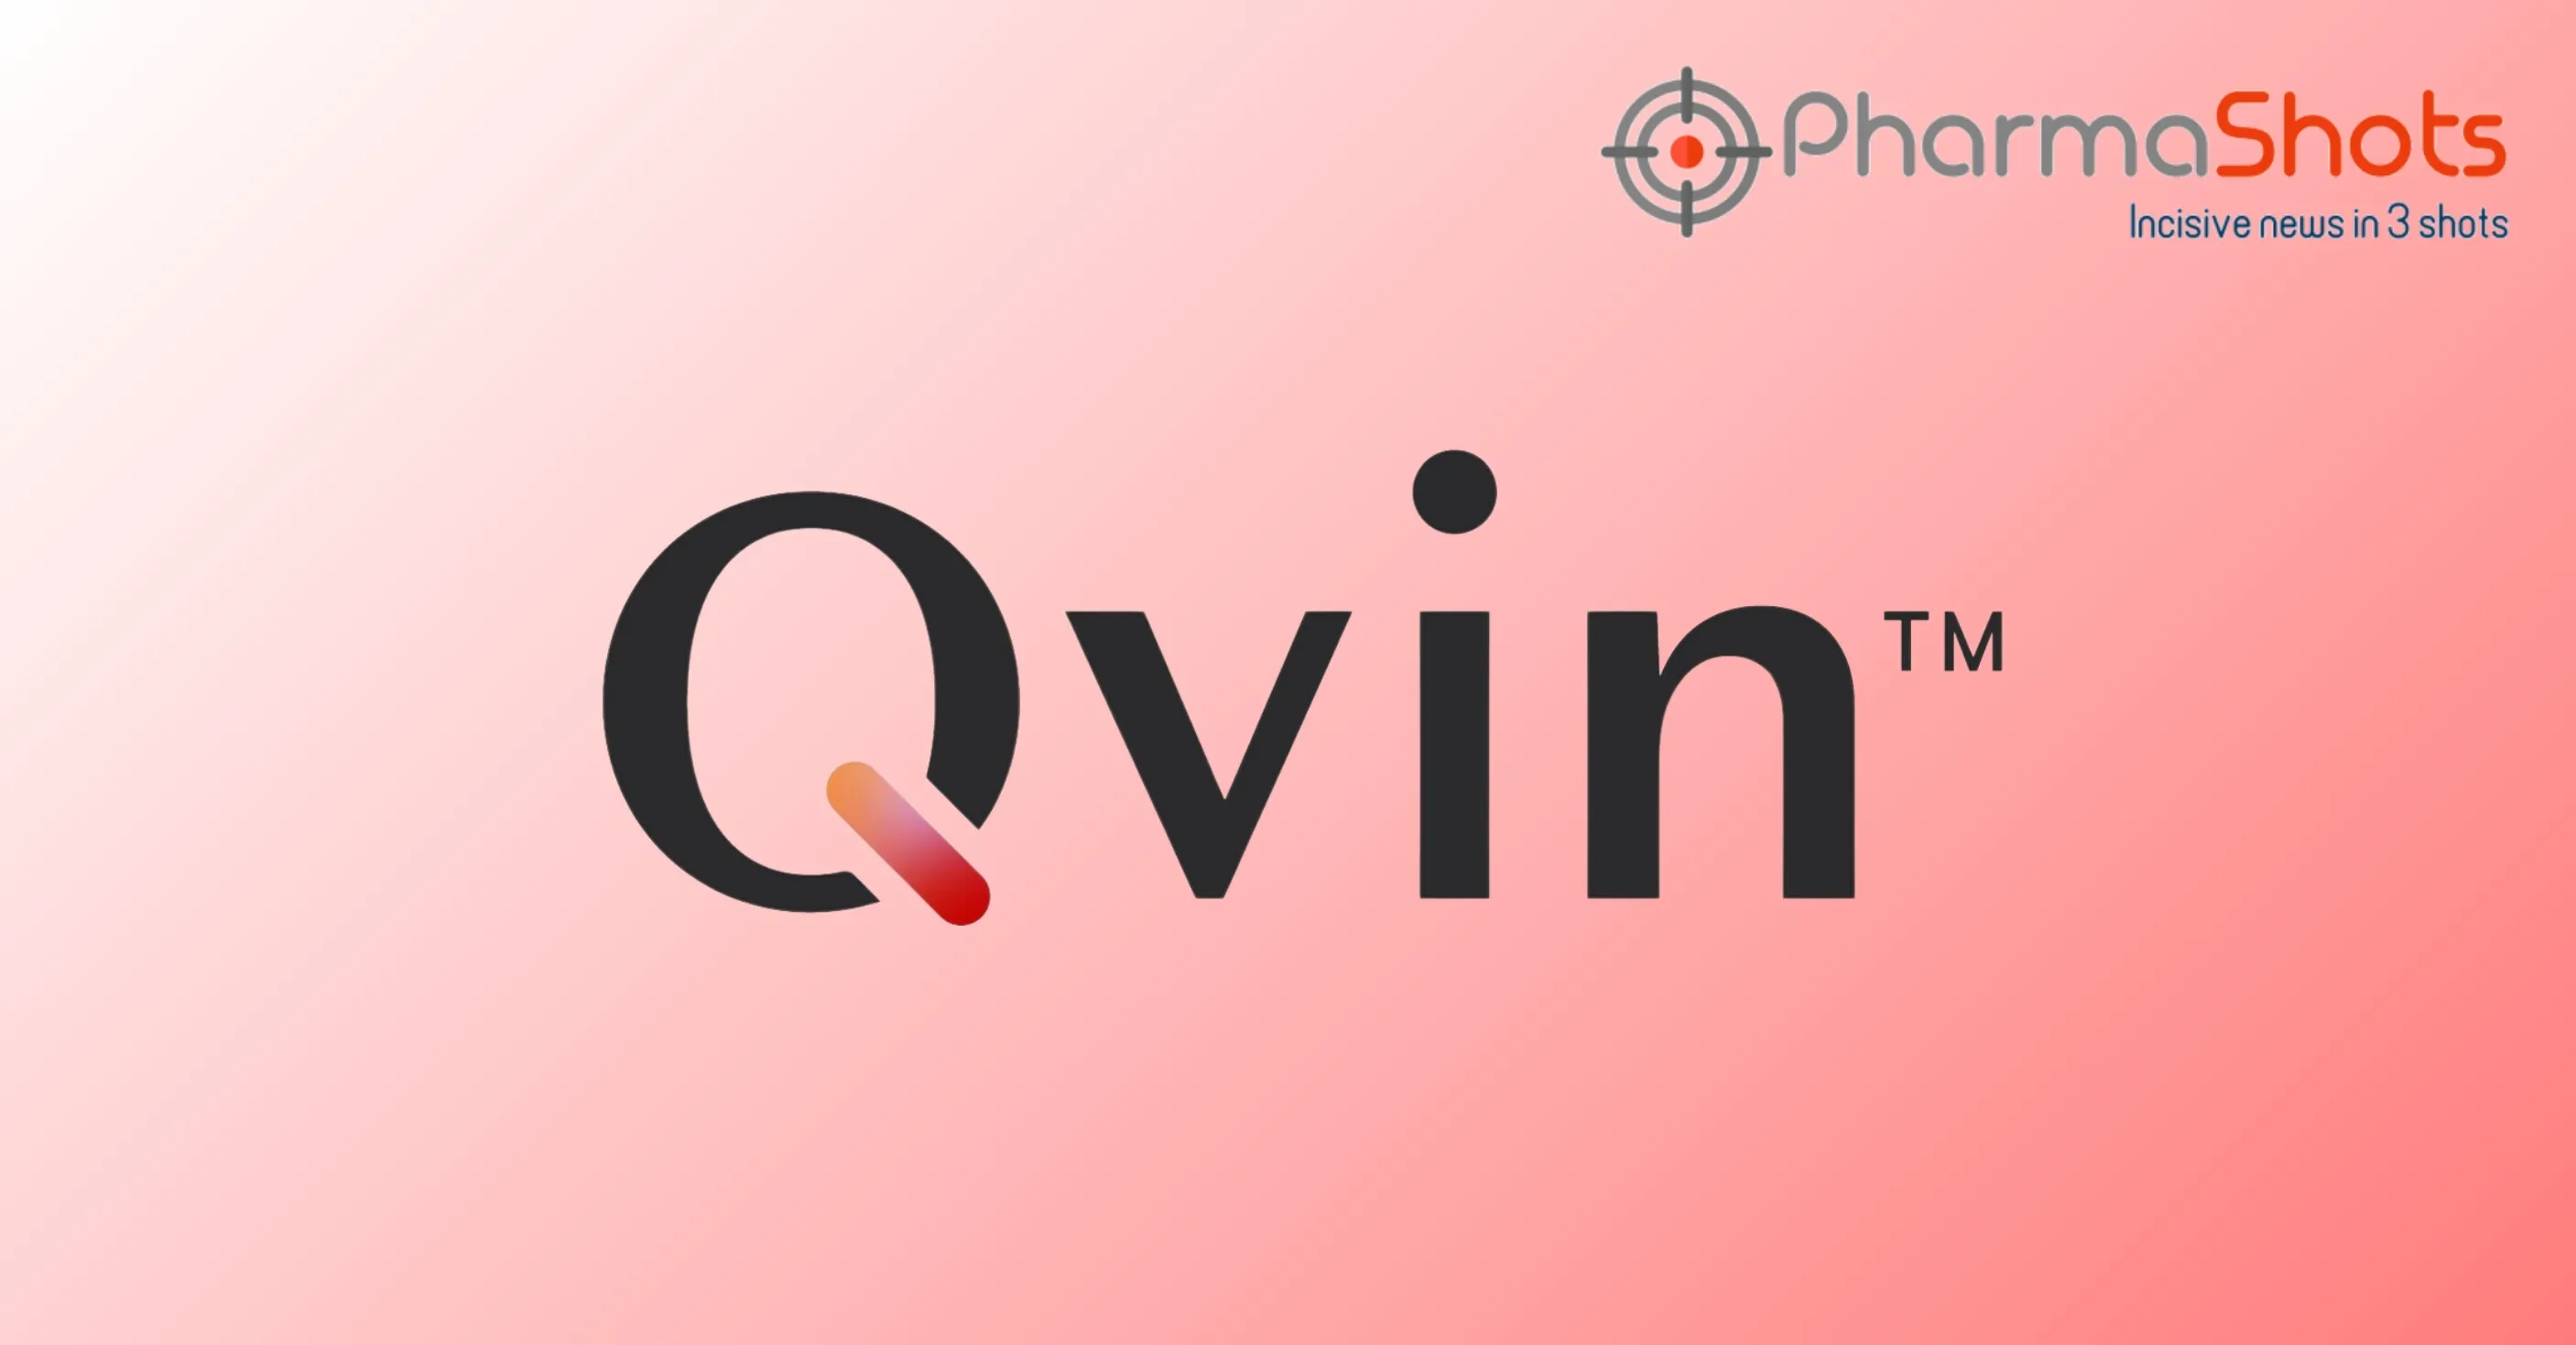 Qvin’s Q-Pad Kit Receives the US FDA’s Approval as a Step to Revolutionize Women’s Health with Menstrual Sample Testing